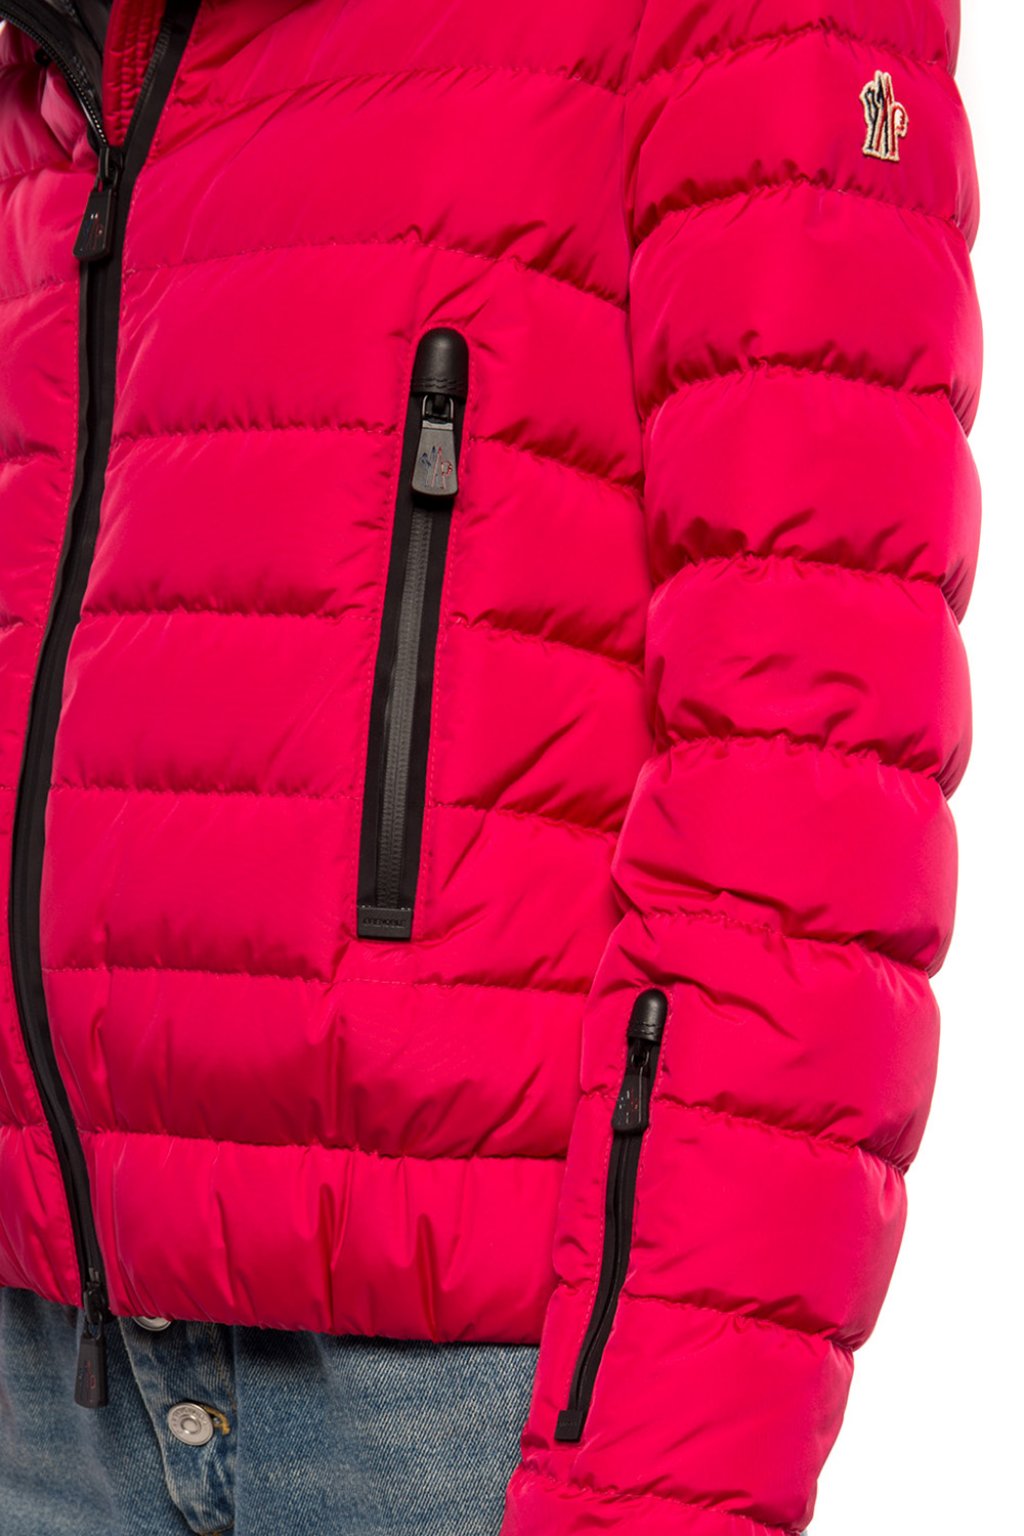 Moncler Grenoble Rebooted as High-performance Brand – WWD